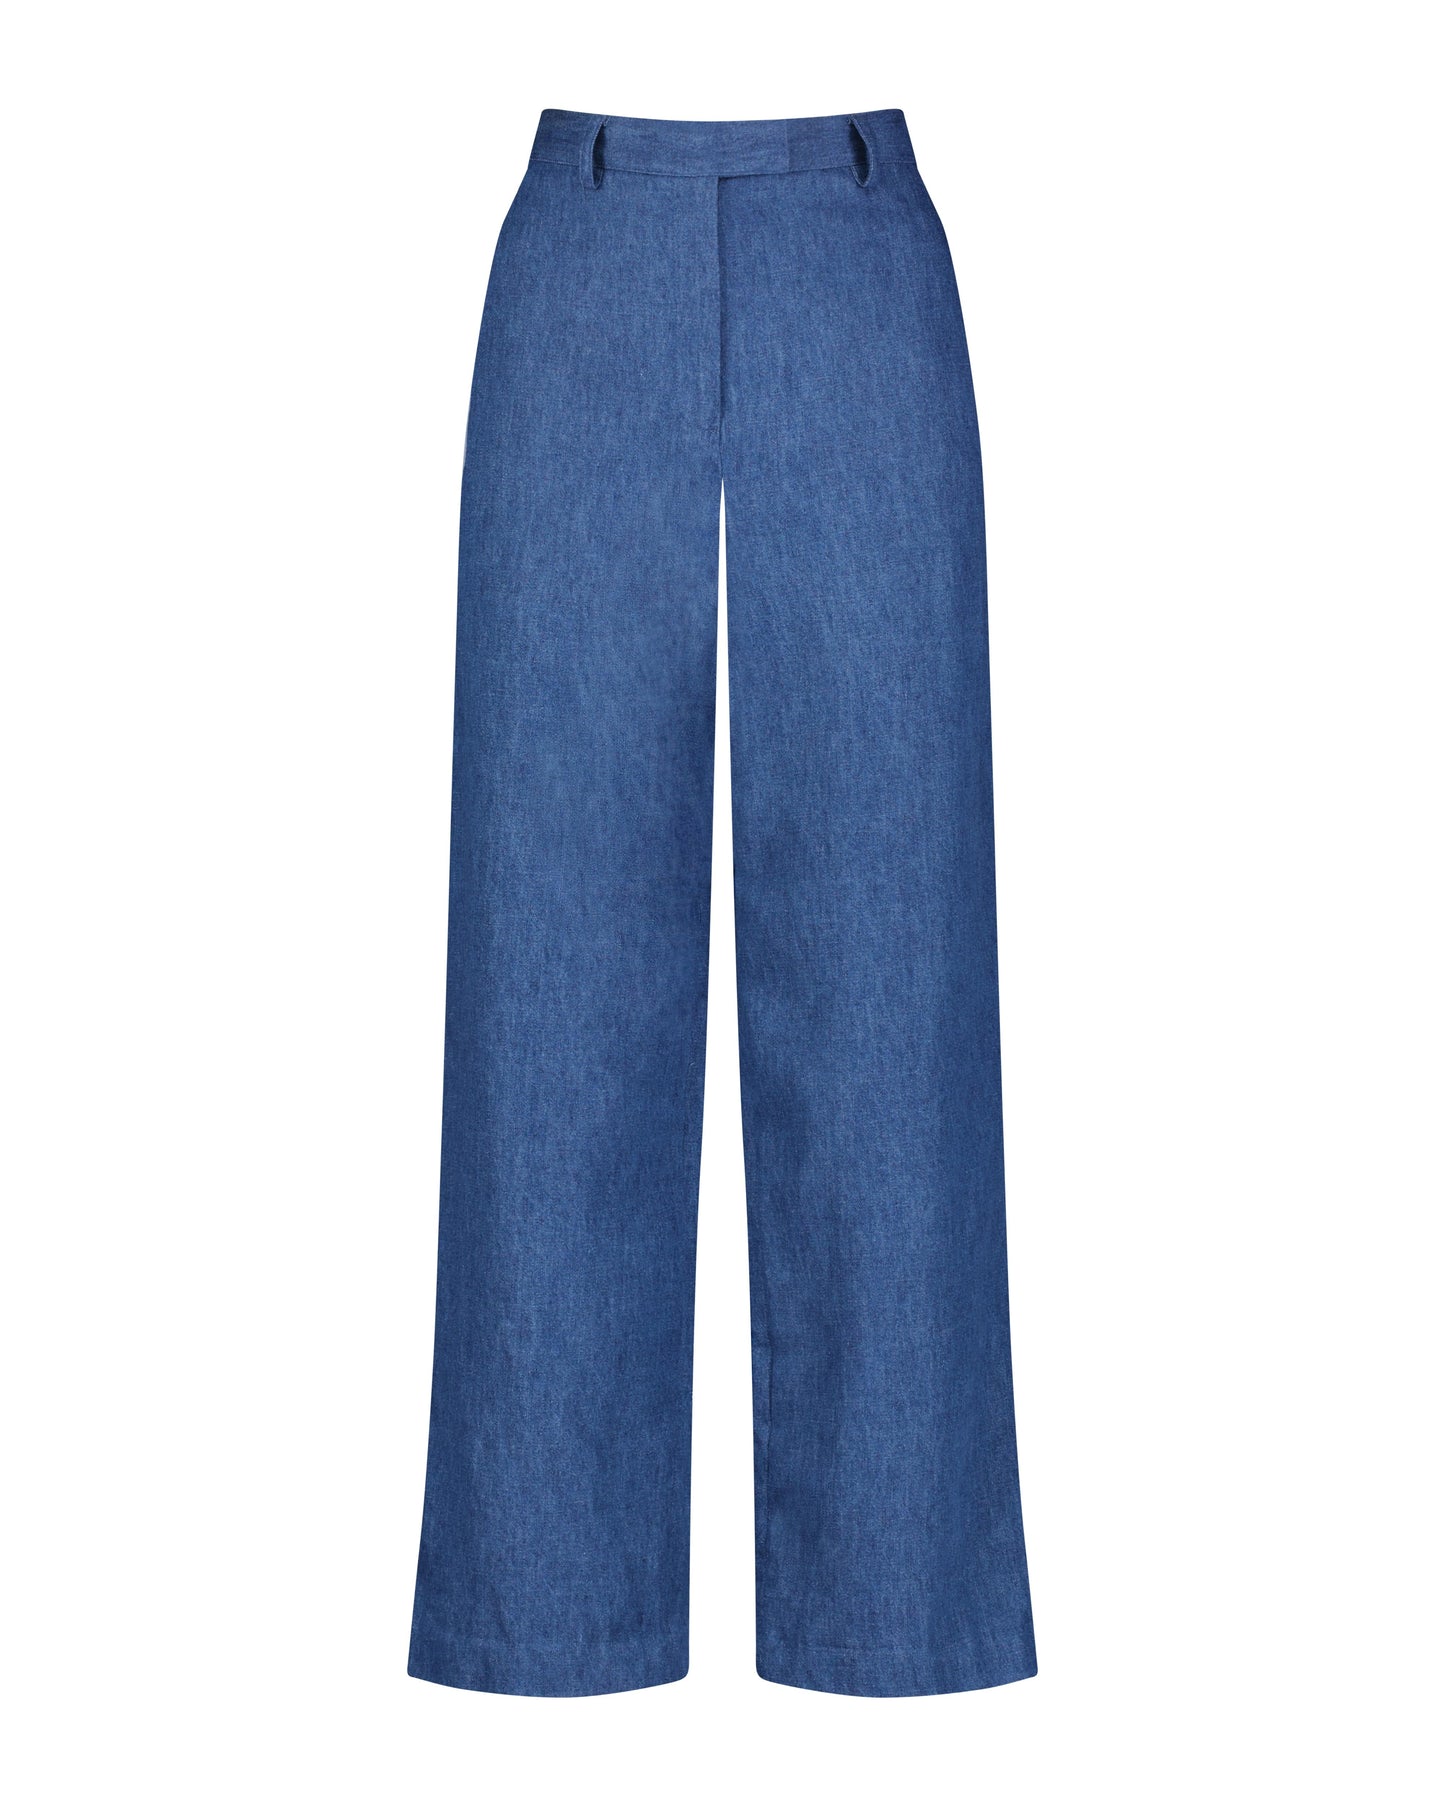 Piper Pant in Soft Denim Pants CHRISTINE ALCALAY   